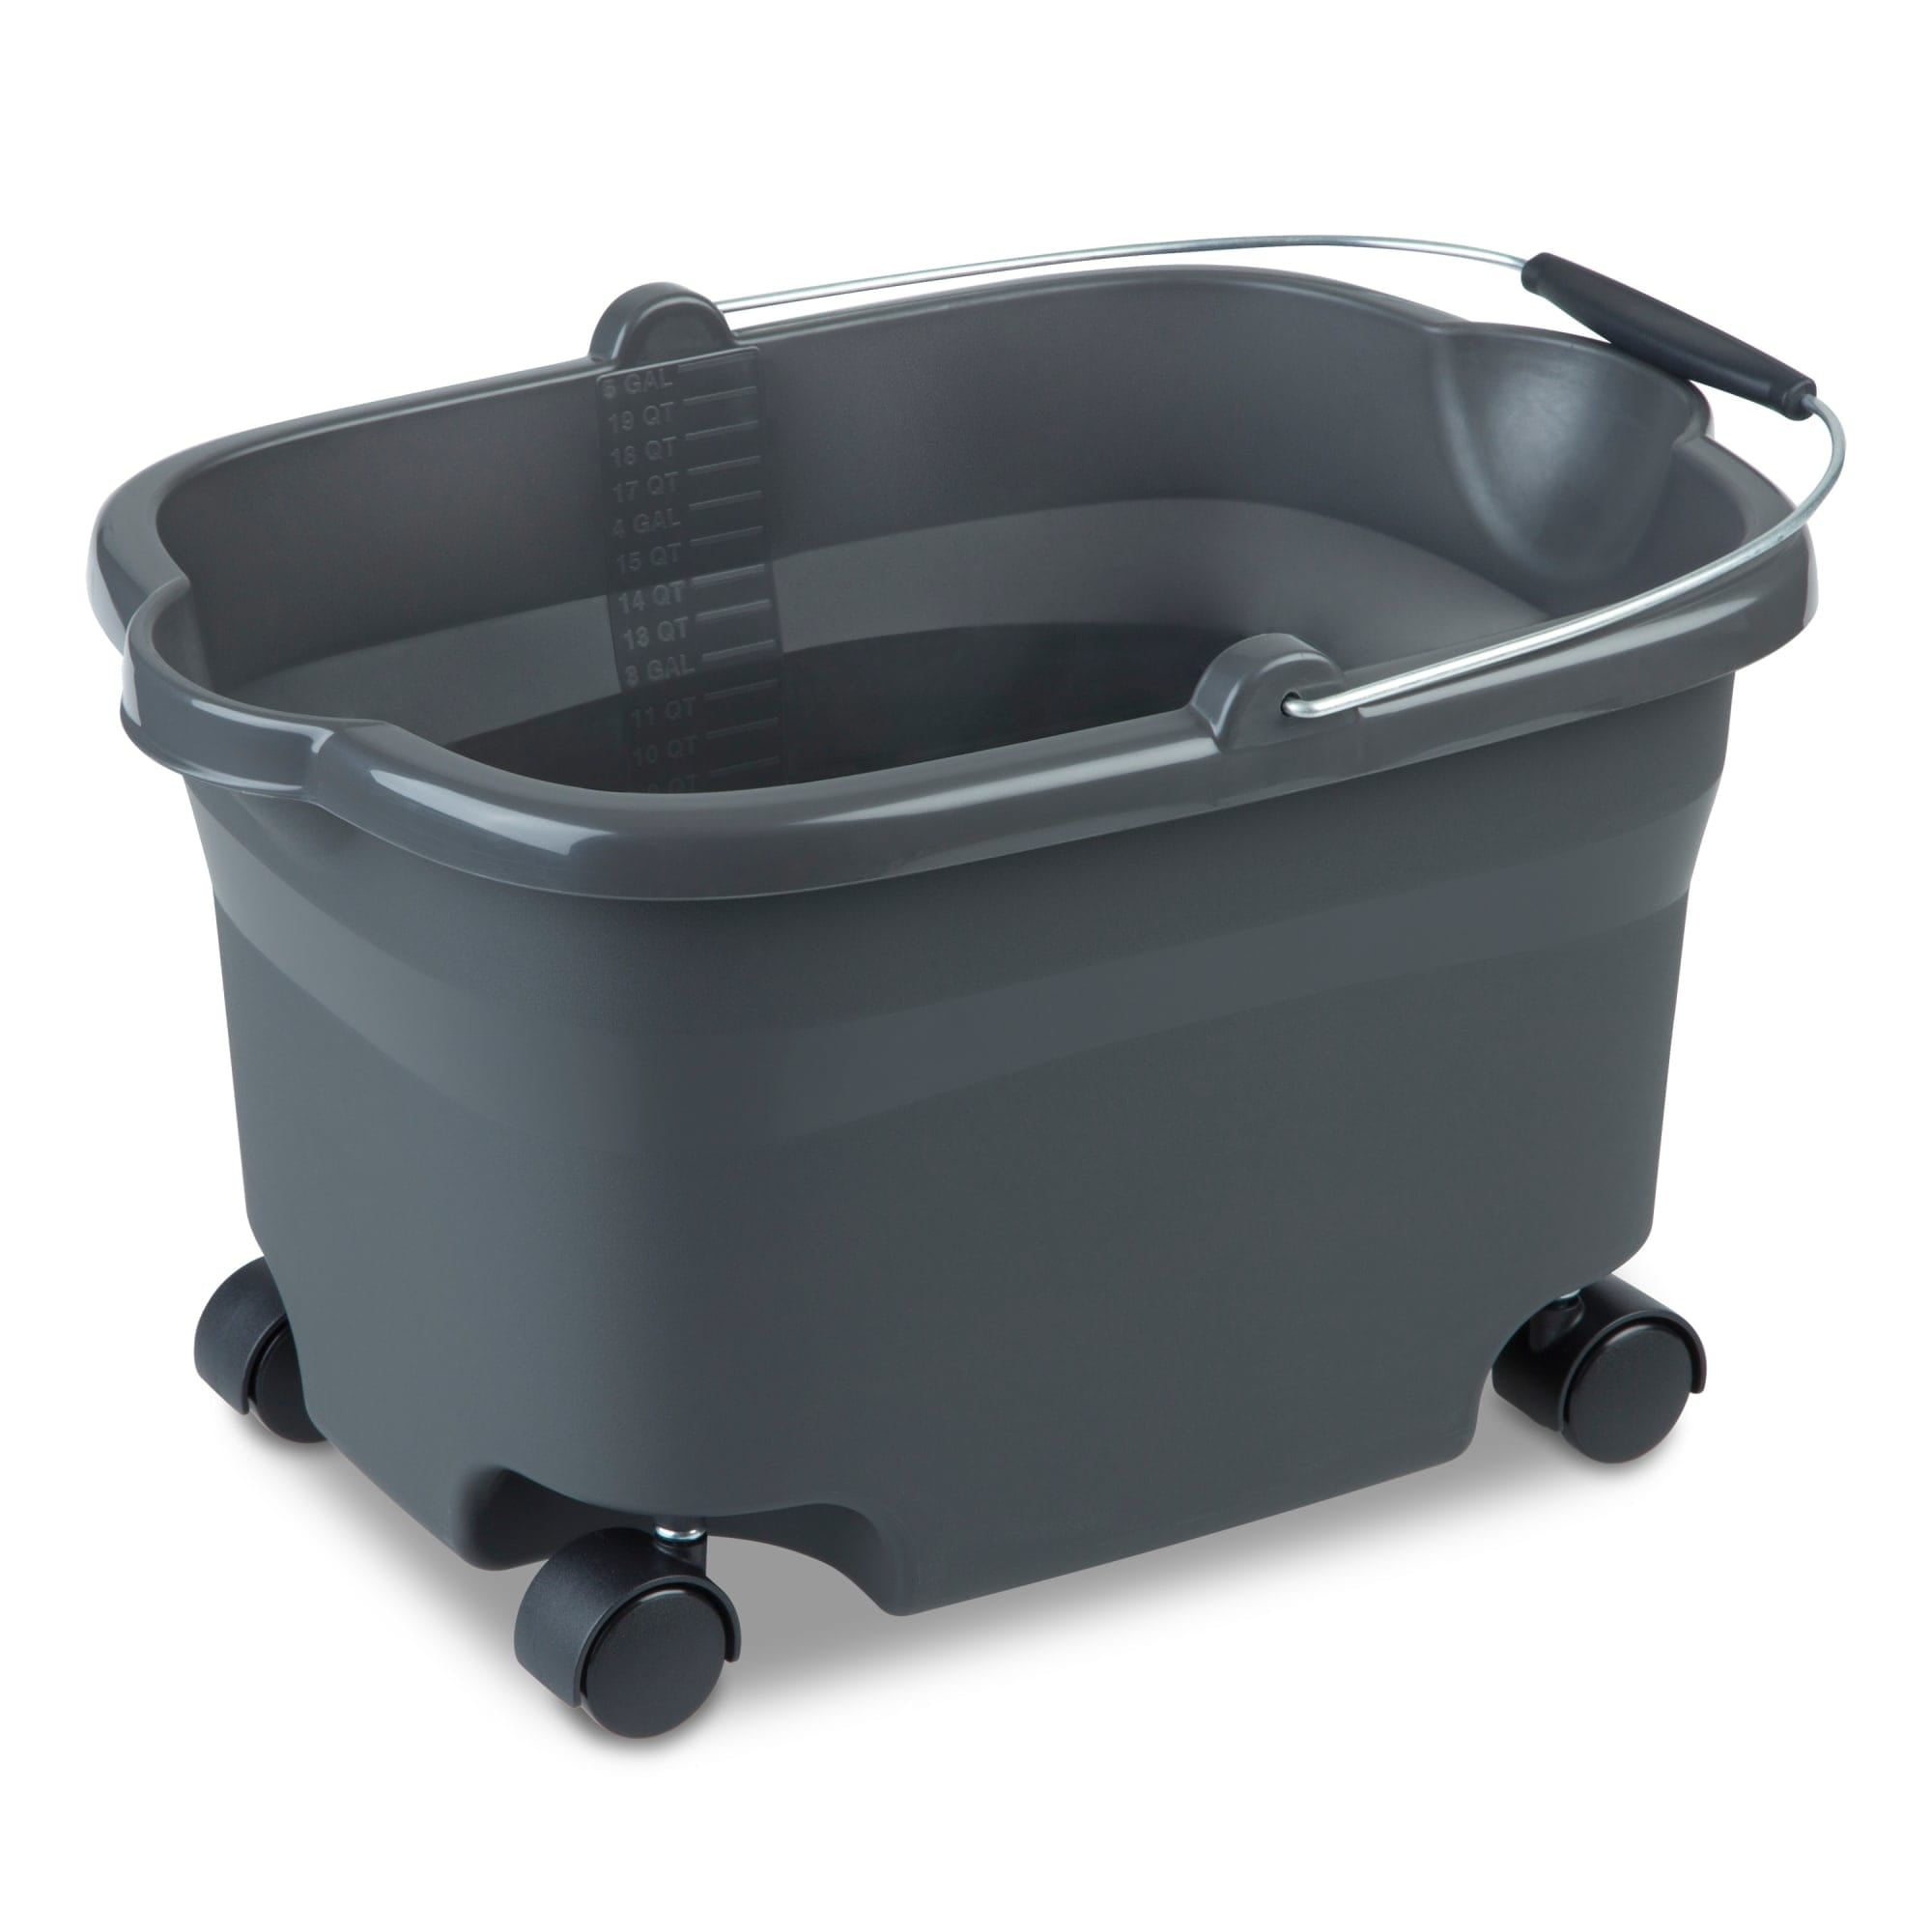 Sterilite 20 Qt. Wheeled Bucket with Comfort Grip, Grey $14.00 EACH, CASE PACK OF 4